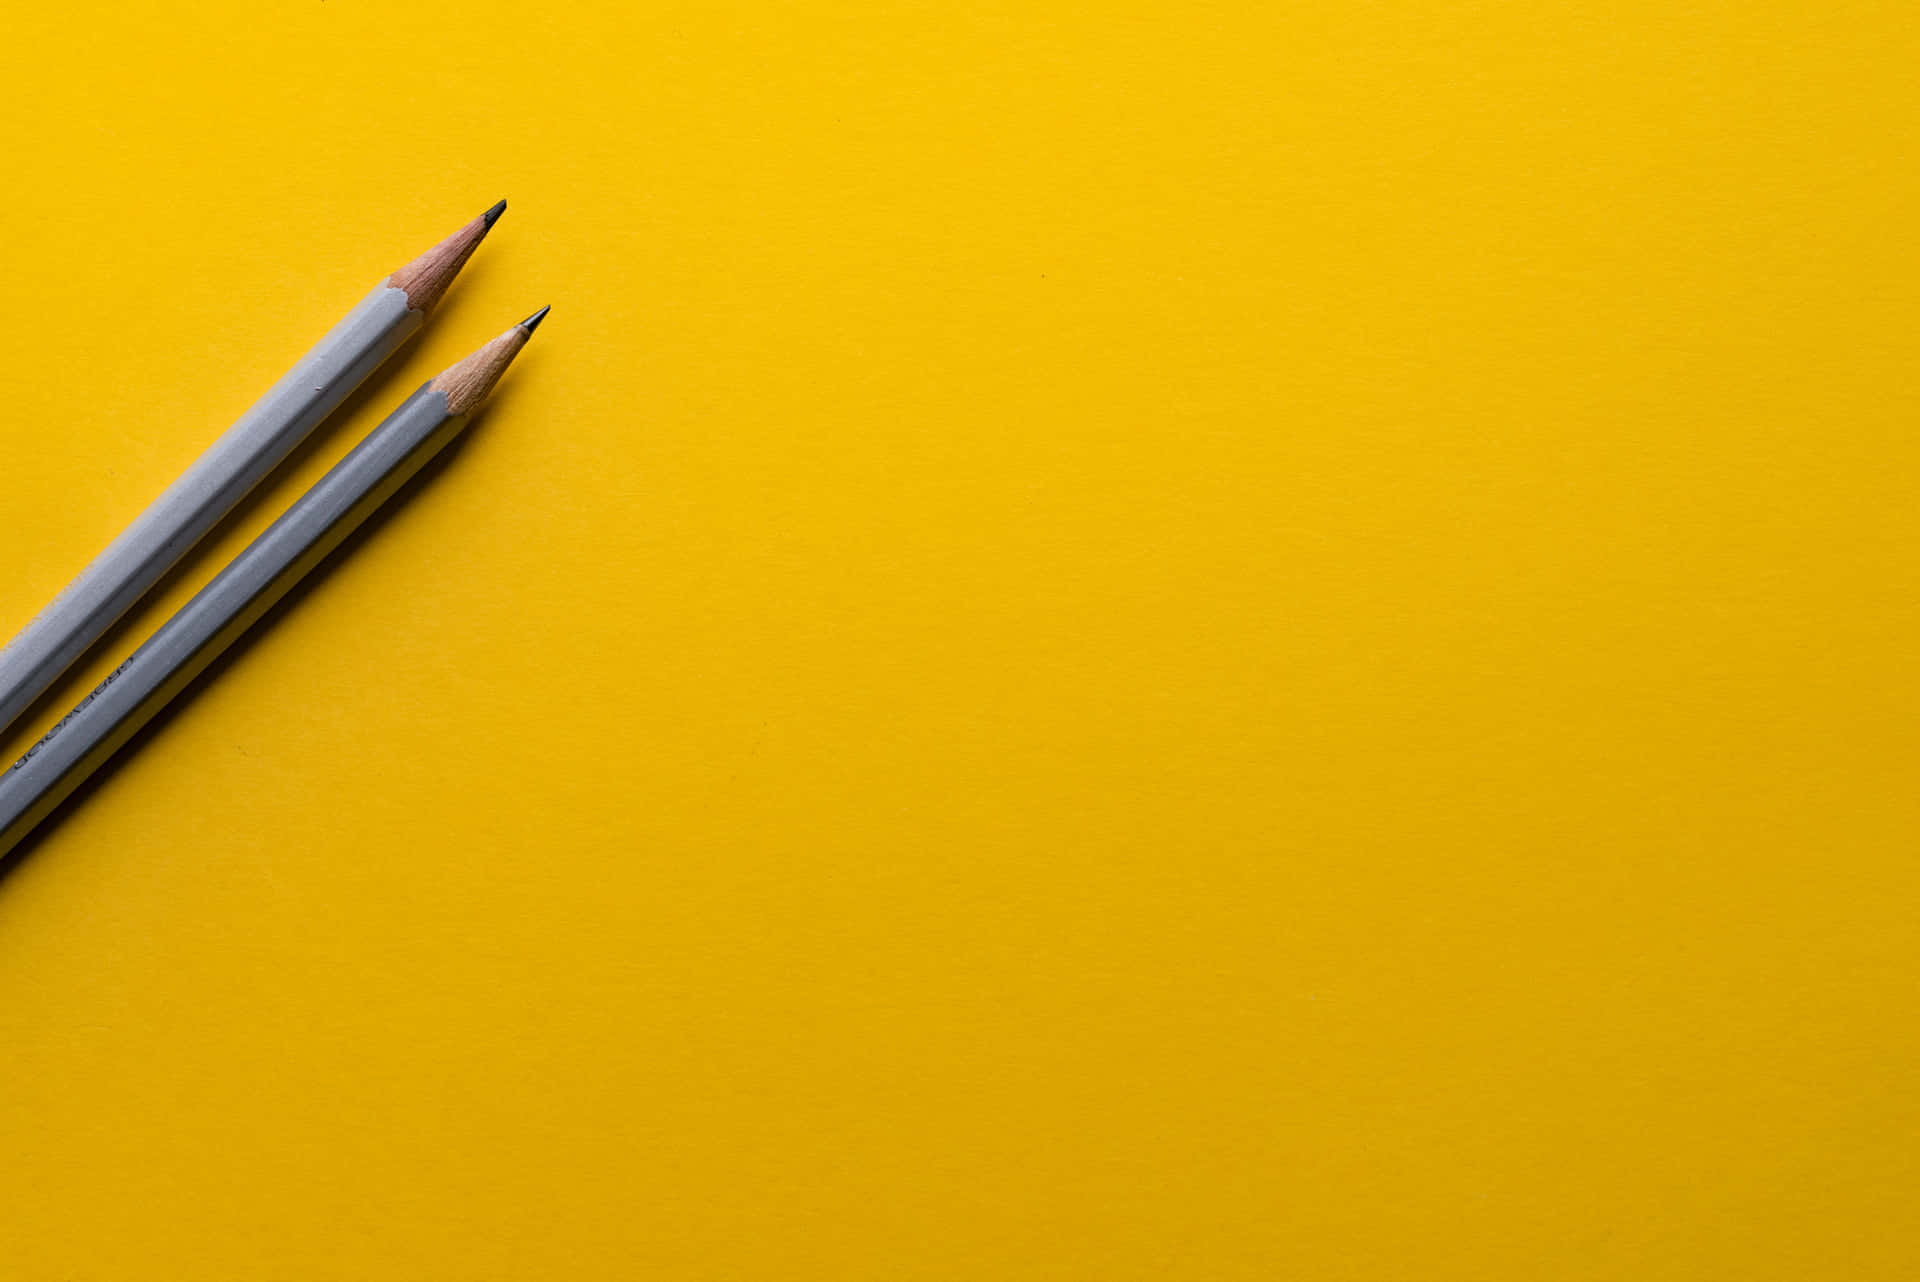 Two Grey Pencils On Yellow Table Color Background